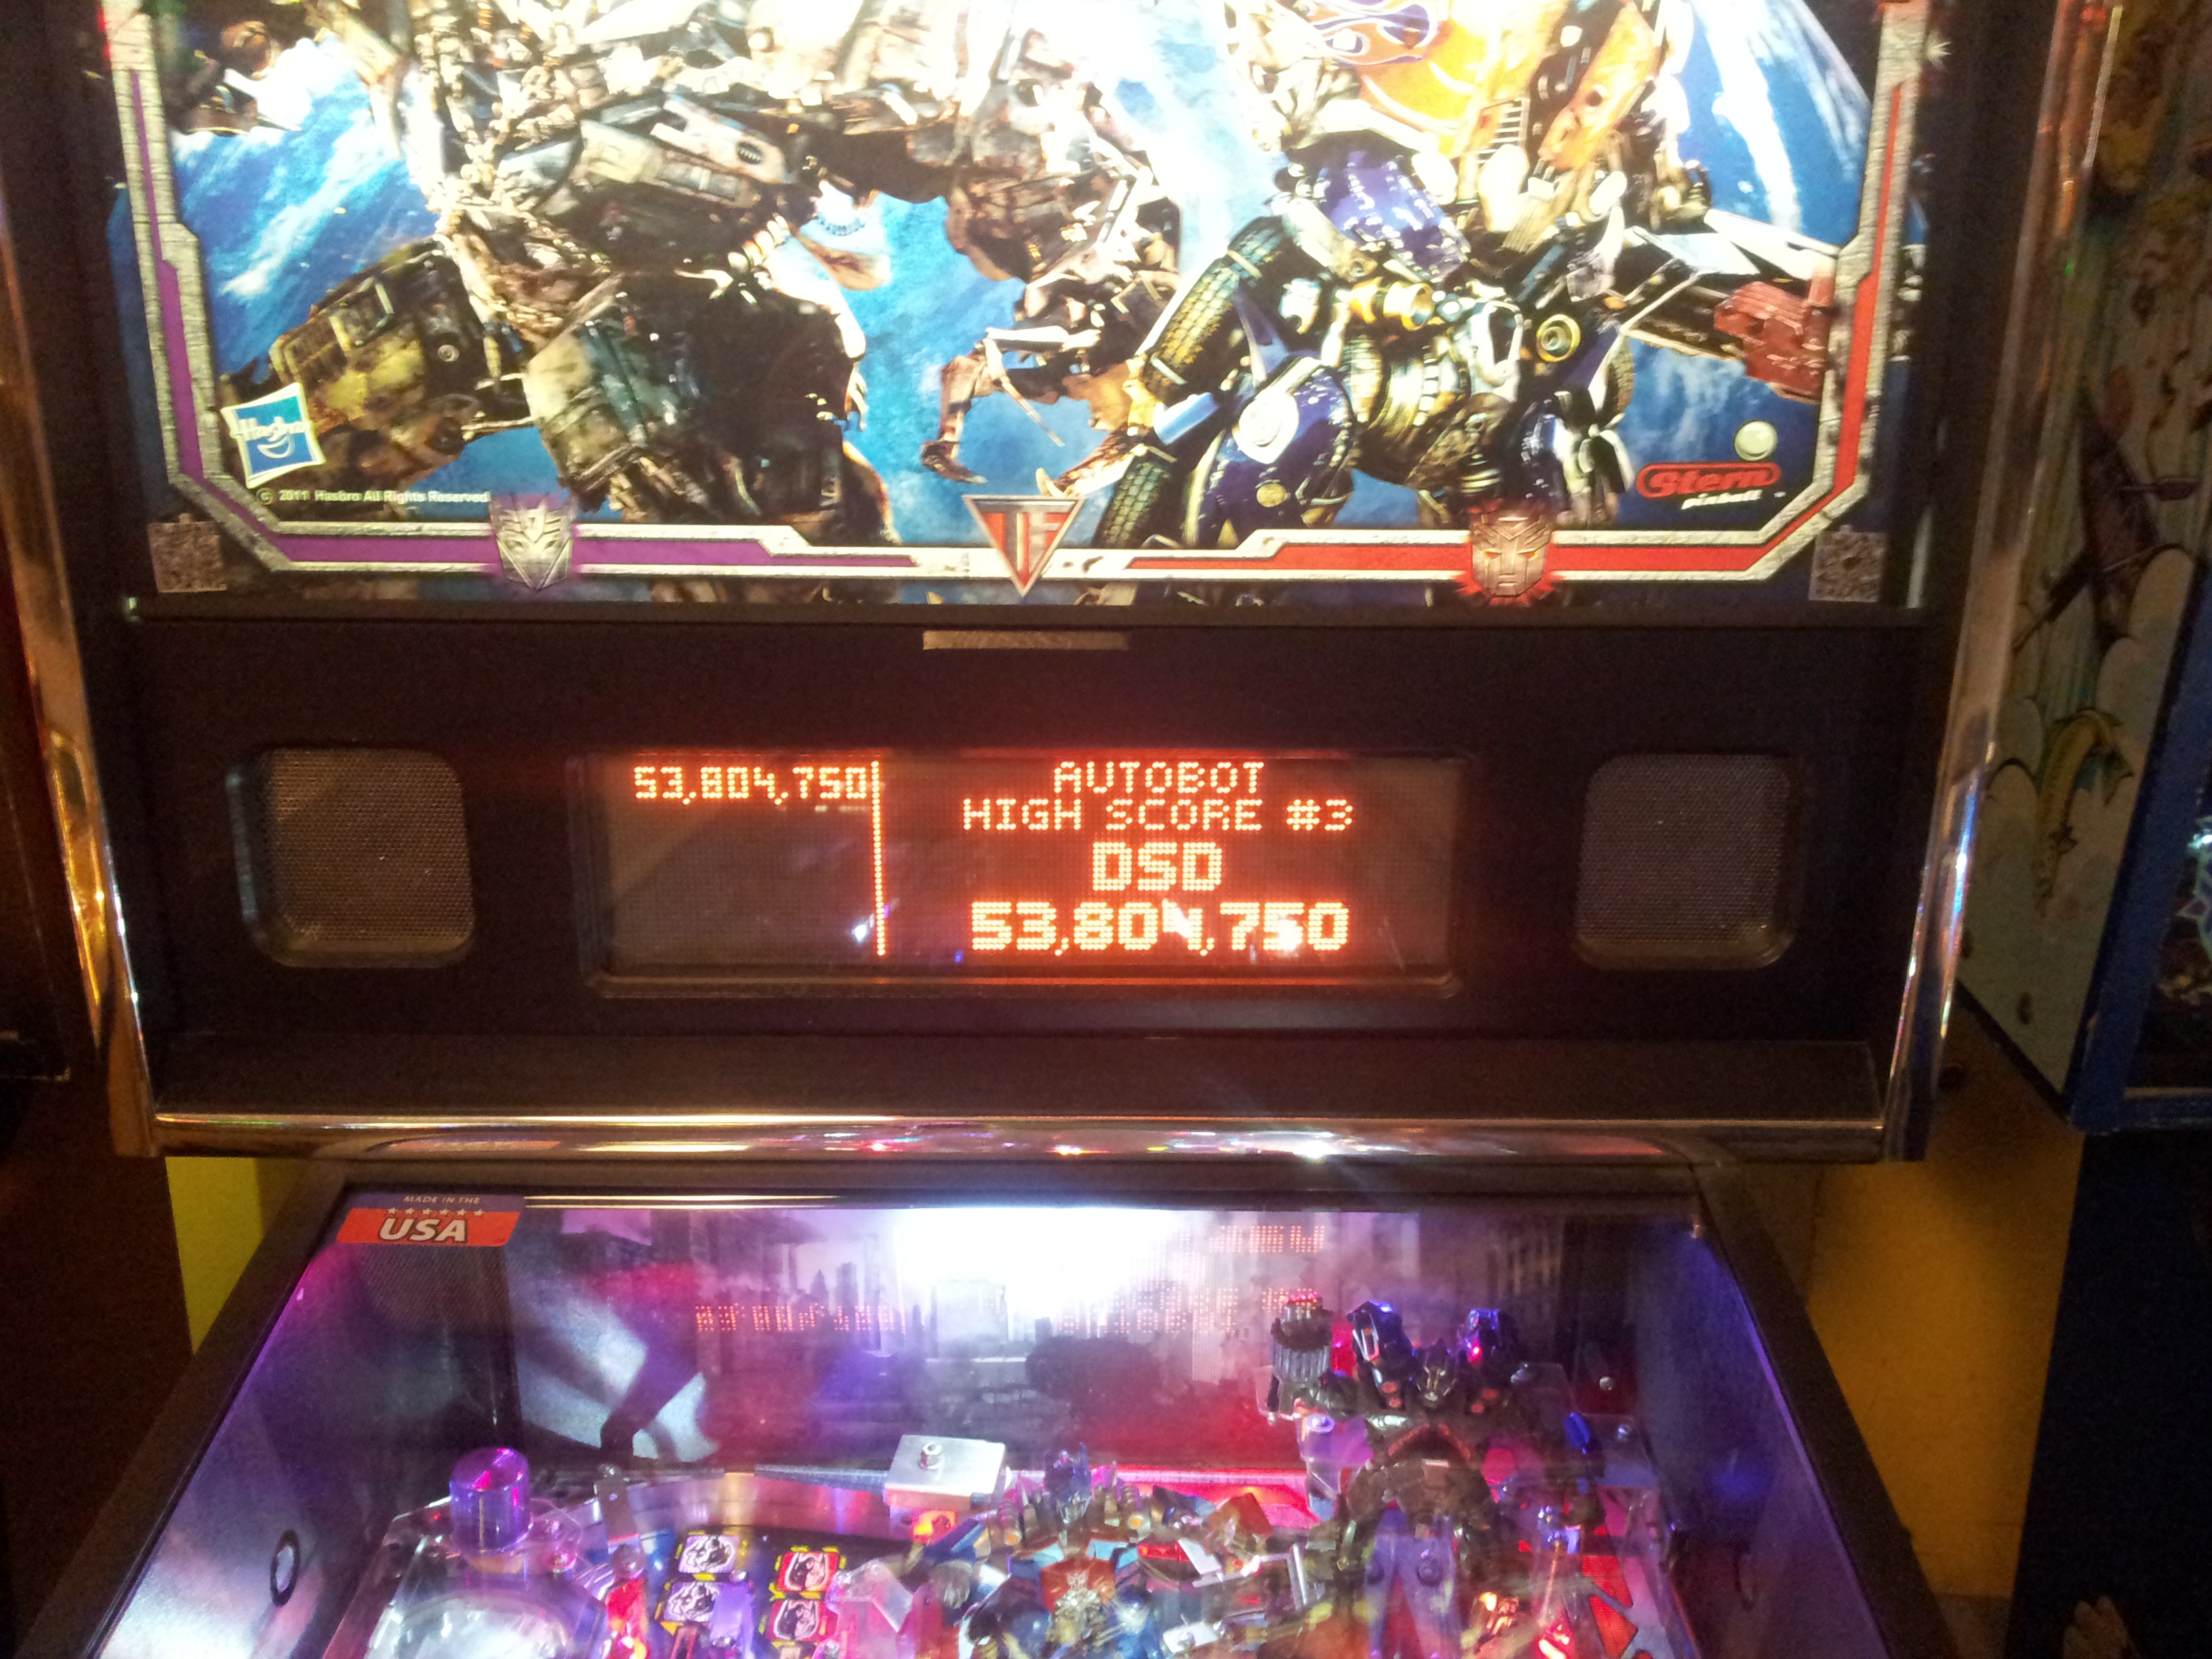 Transformers 53,804,750 points